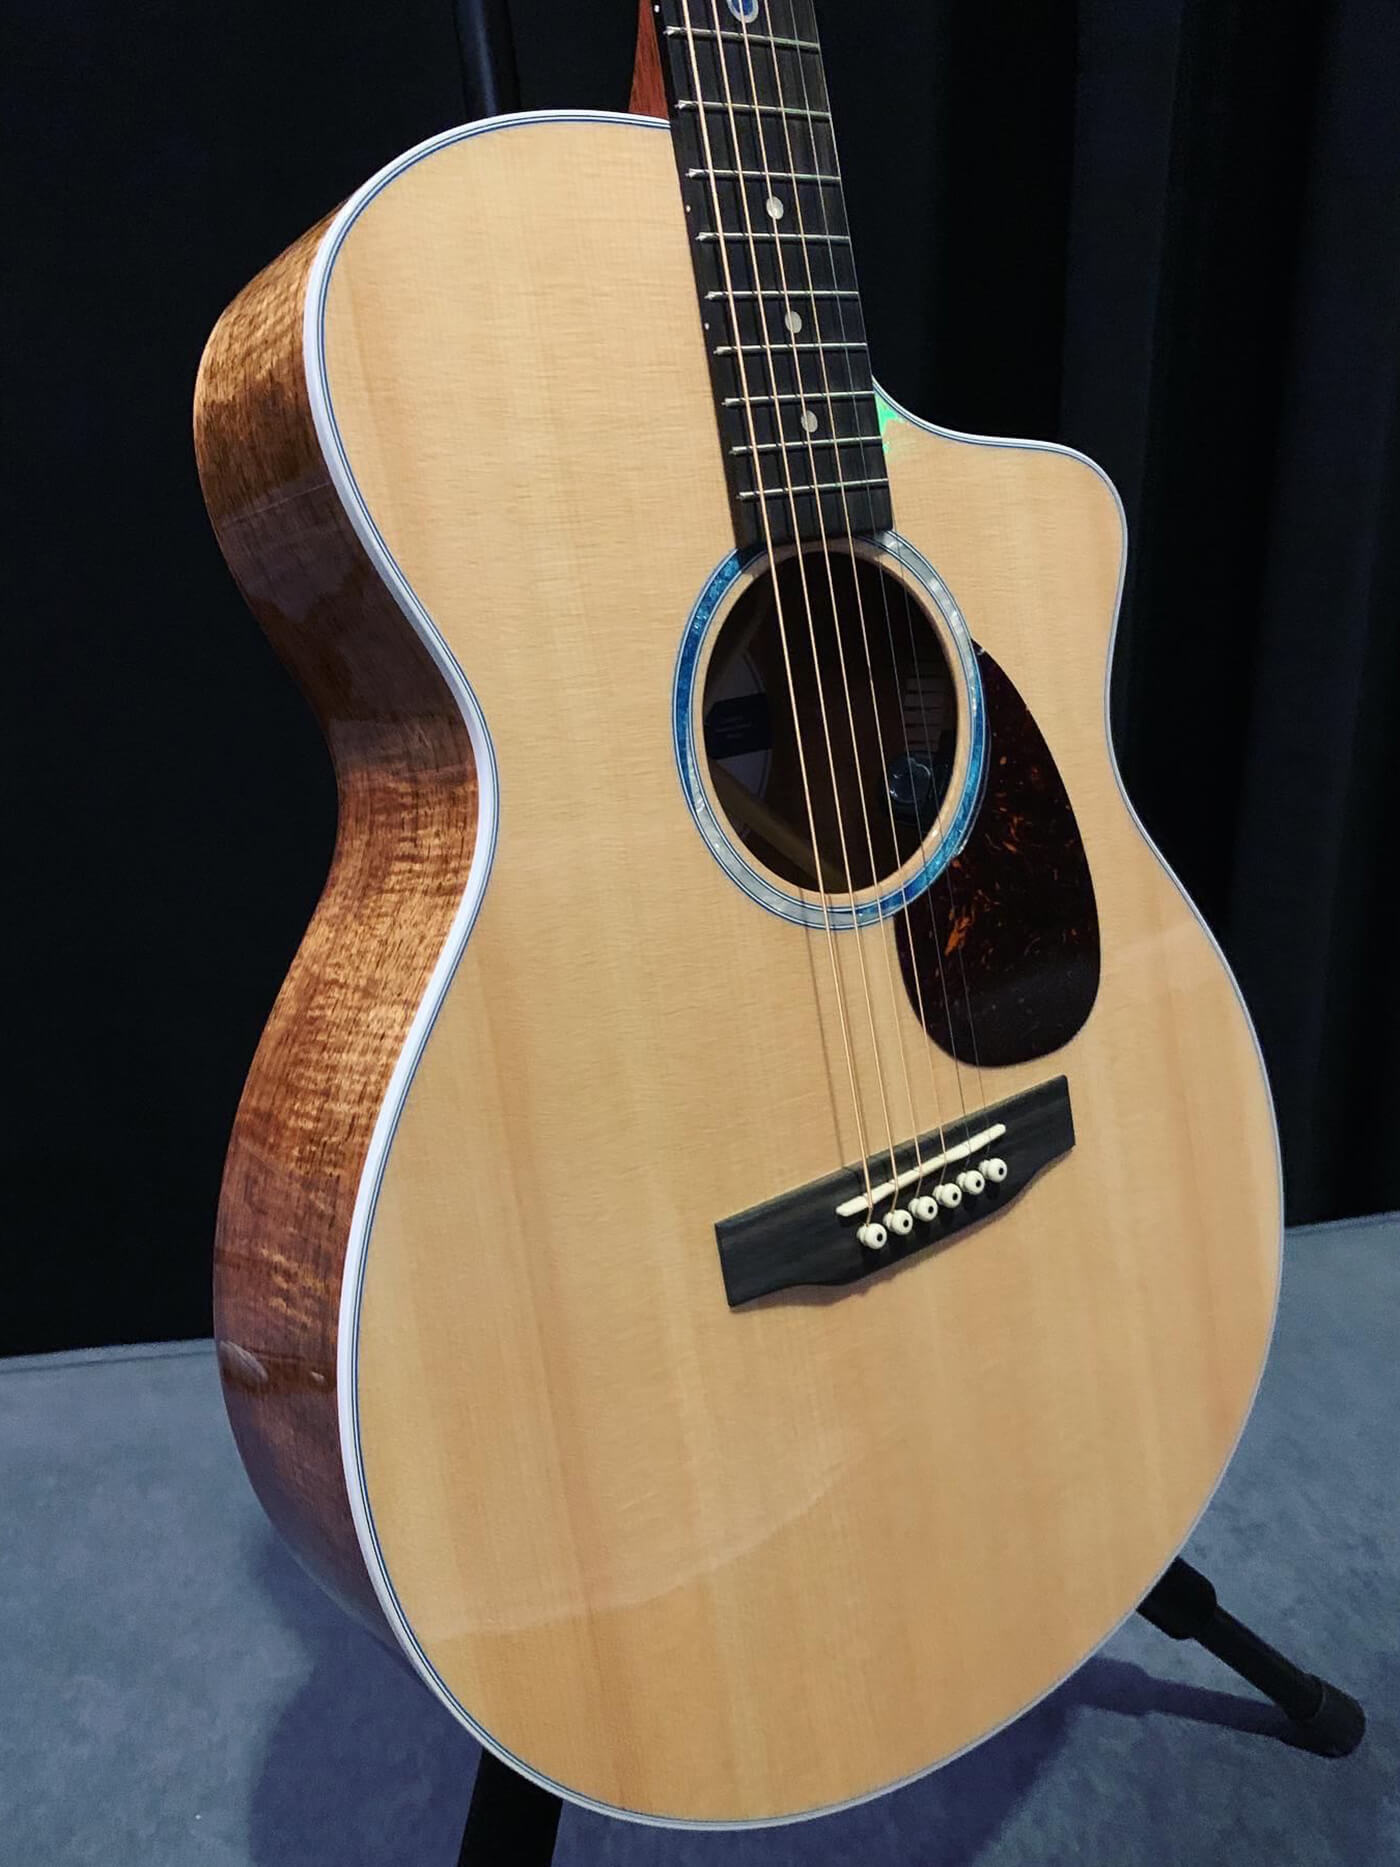 NAMM 2020 Video: radical new SC-13E bridges the between and